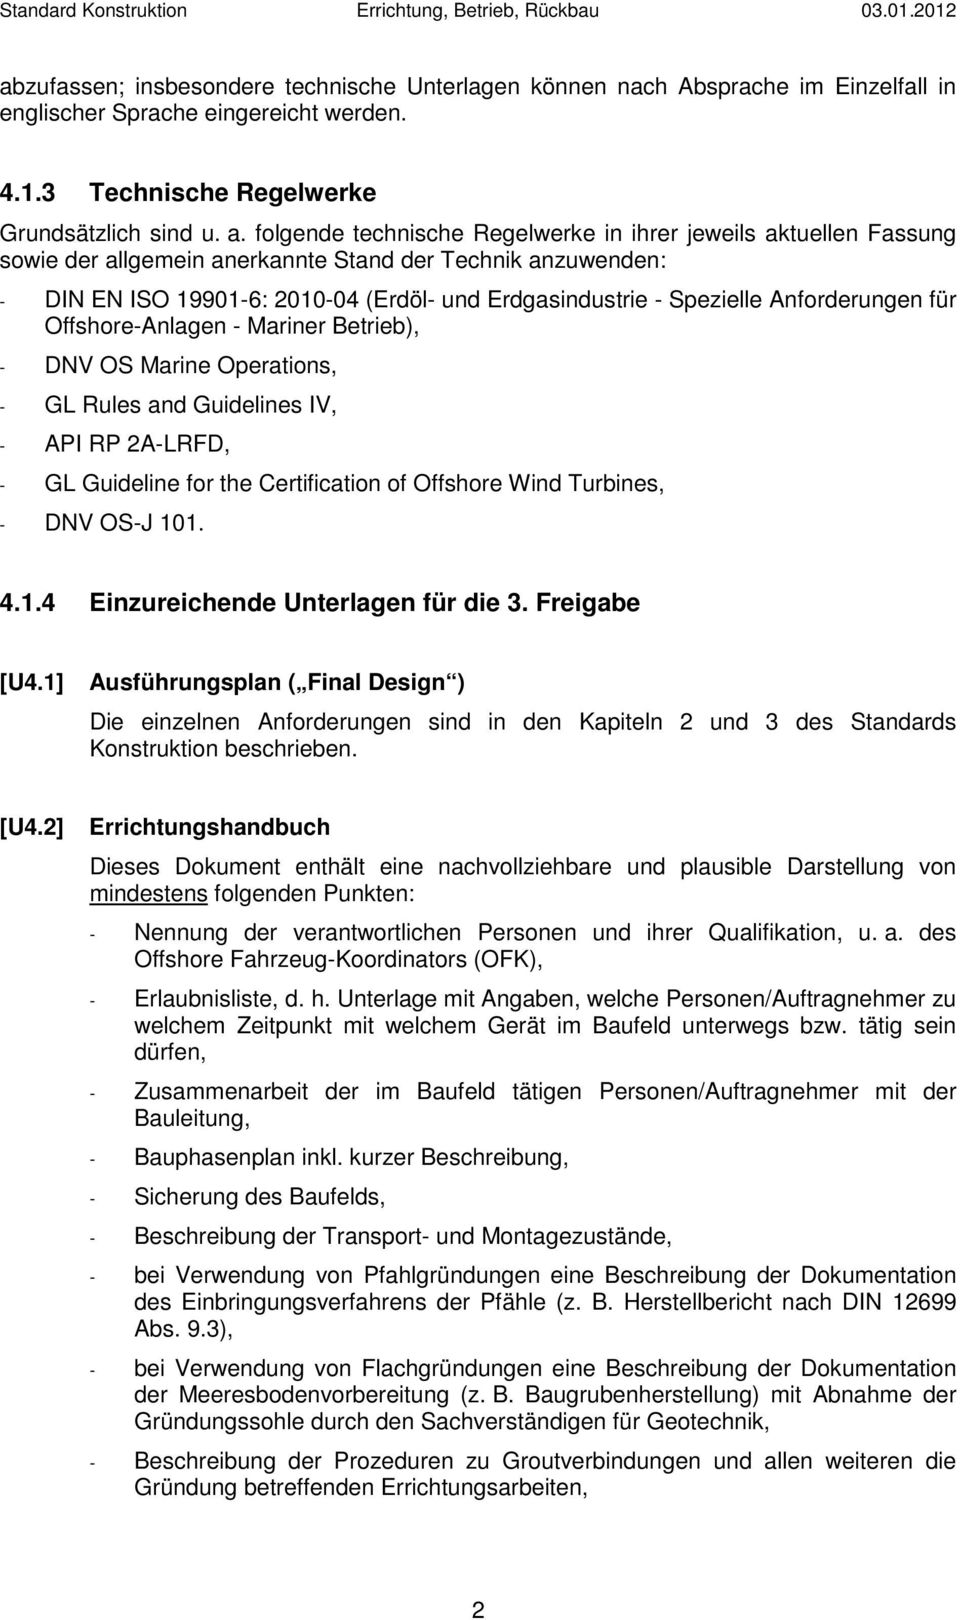 Anforderungen für Offshore-Anlagen - Mariner Betrieb), - DNV OS Marine Operations, - GL Rules and Guidelines IV, - API RP 2A-LRFD, - GL Guideline for the Certification of Offshore Wind Turbines, -